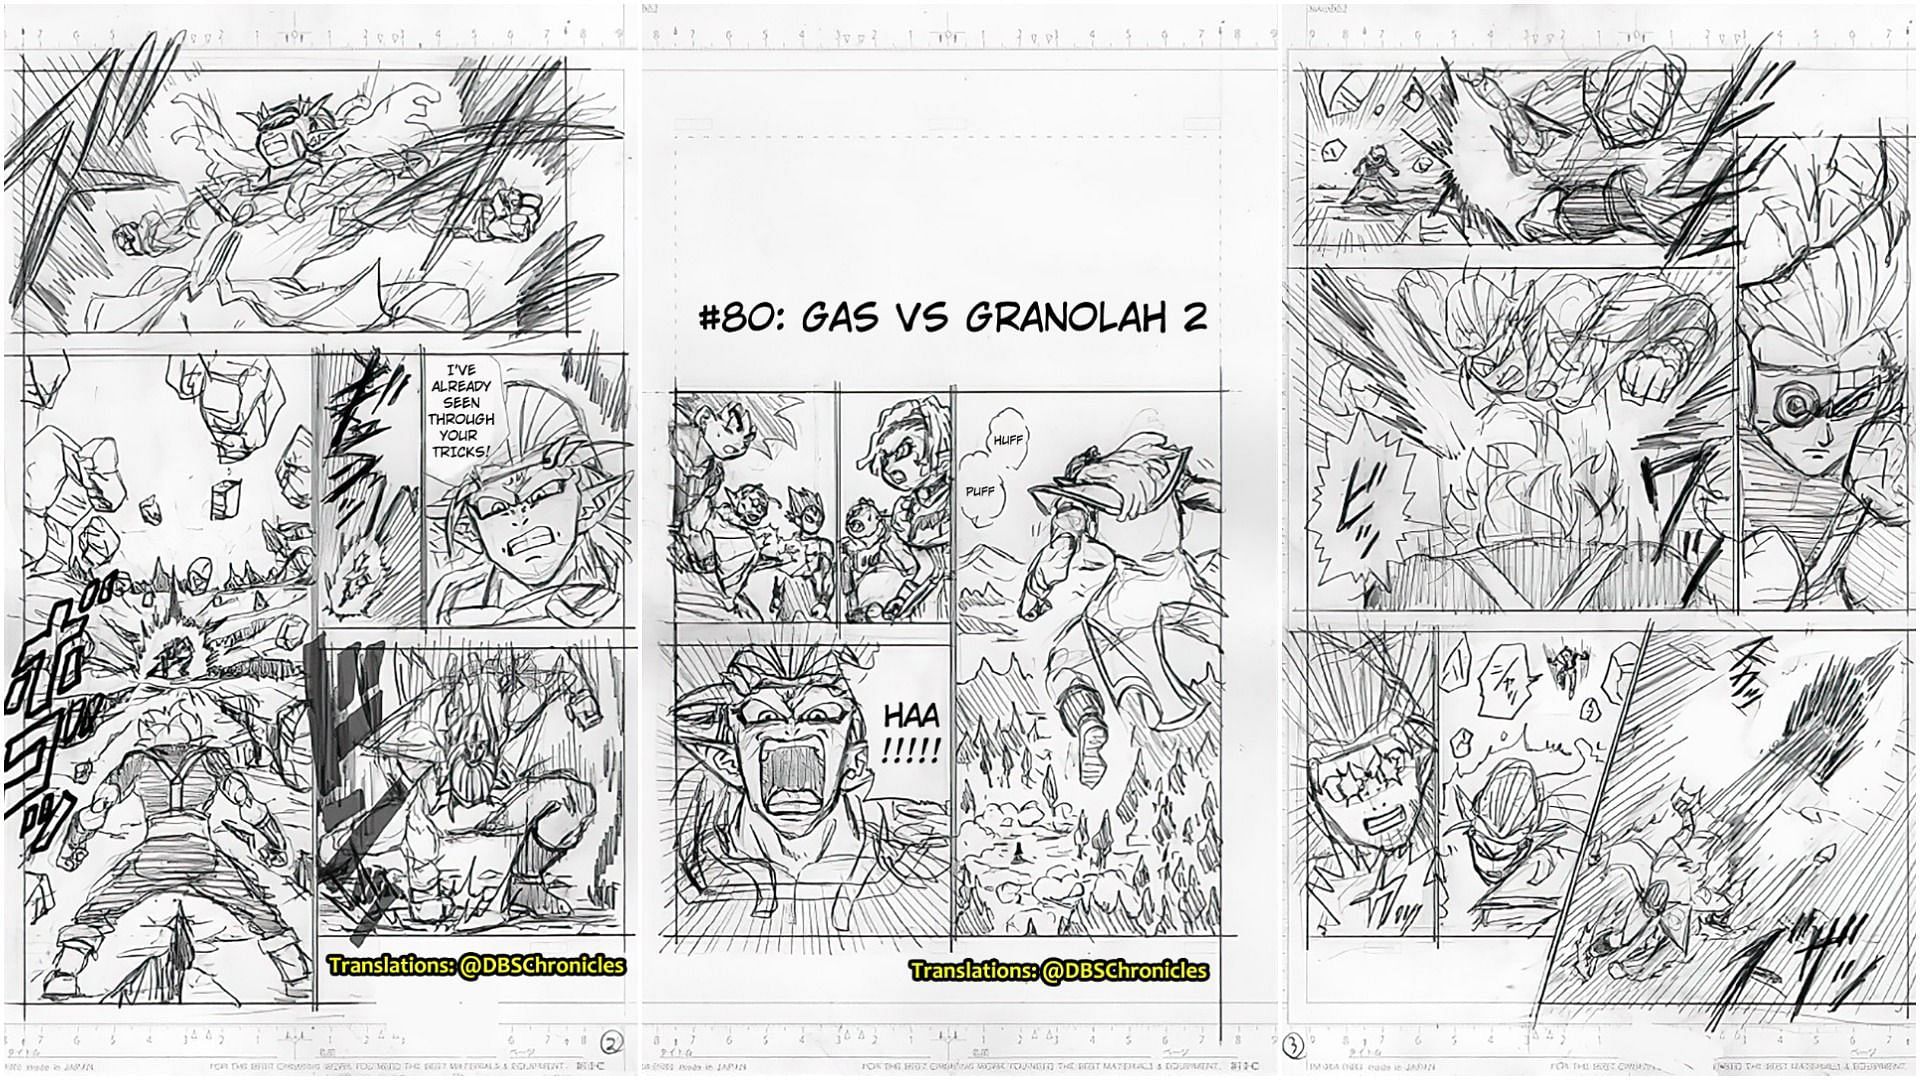 The new set of first draft drawings for chapter 80 showcase the continuation of the fight from chapter 79 (Image via Twitter/@DBSChronicles)